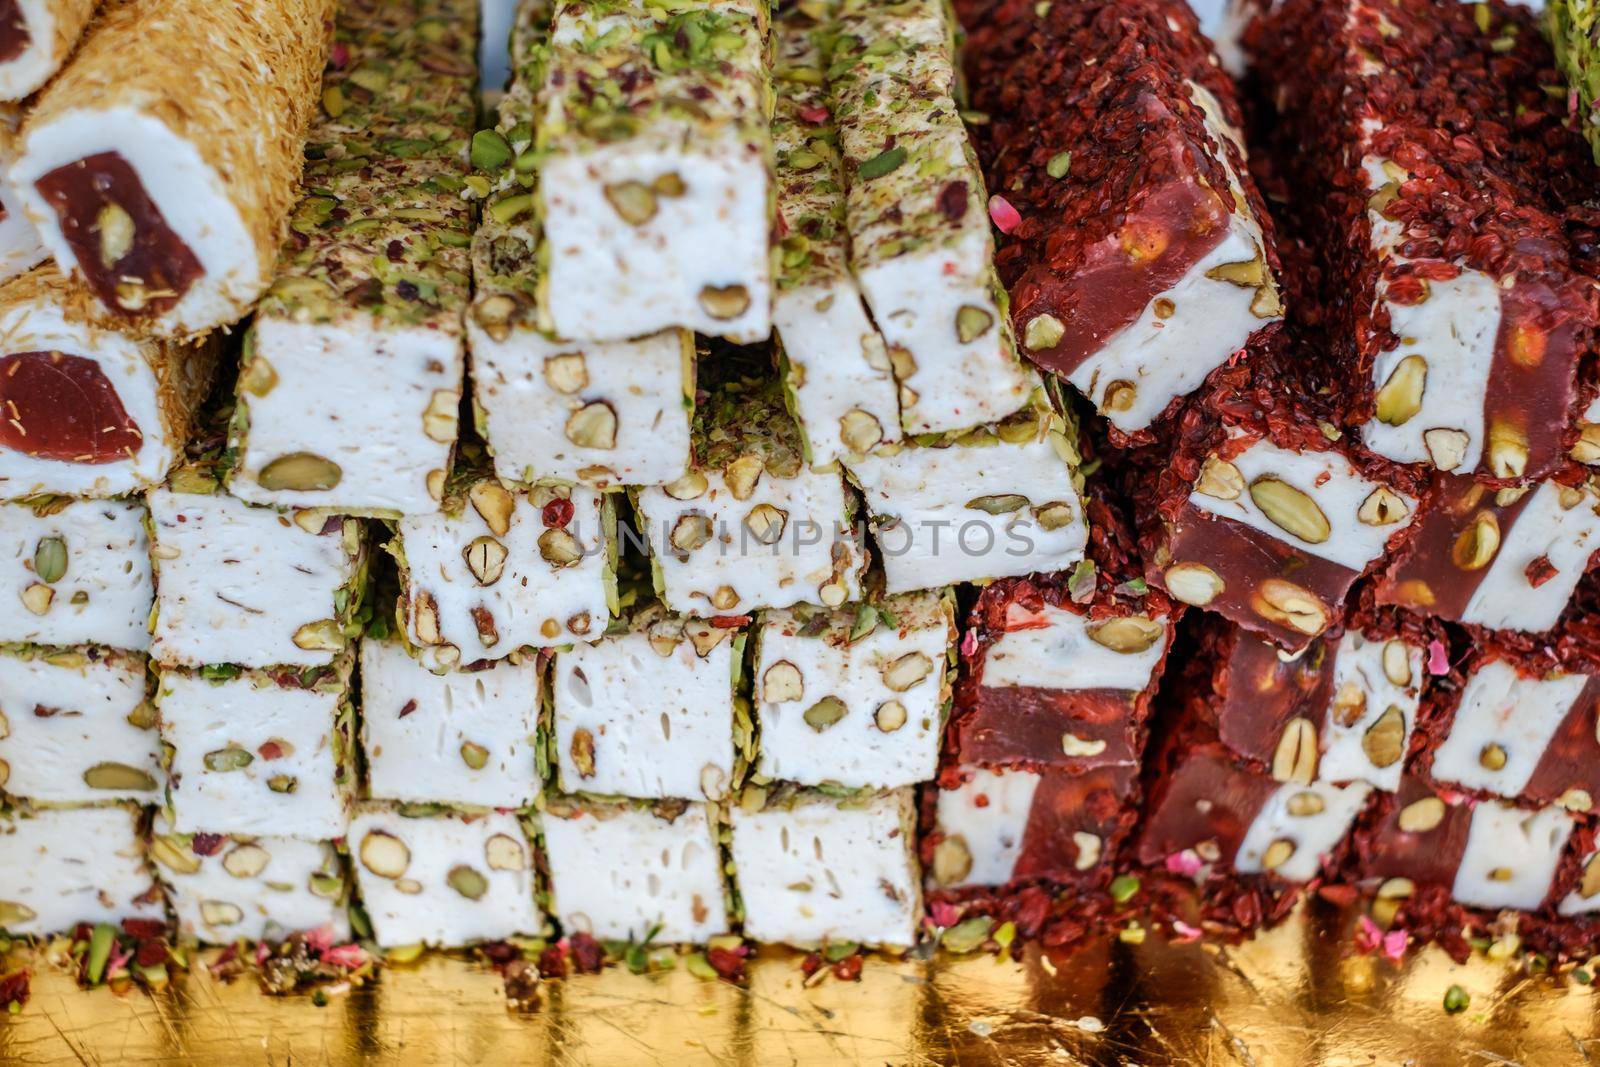 Variety of Turkish signature local foods known as Turkish Delight available for sale mostly in all areas in Turkey country